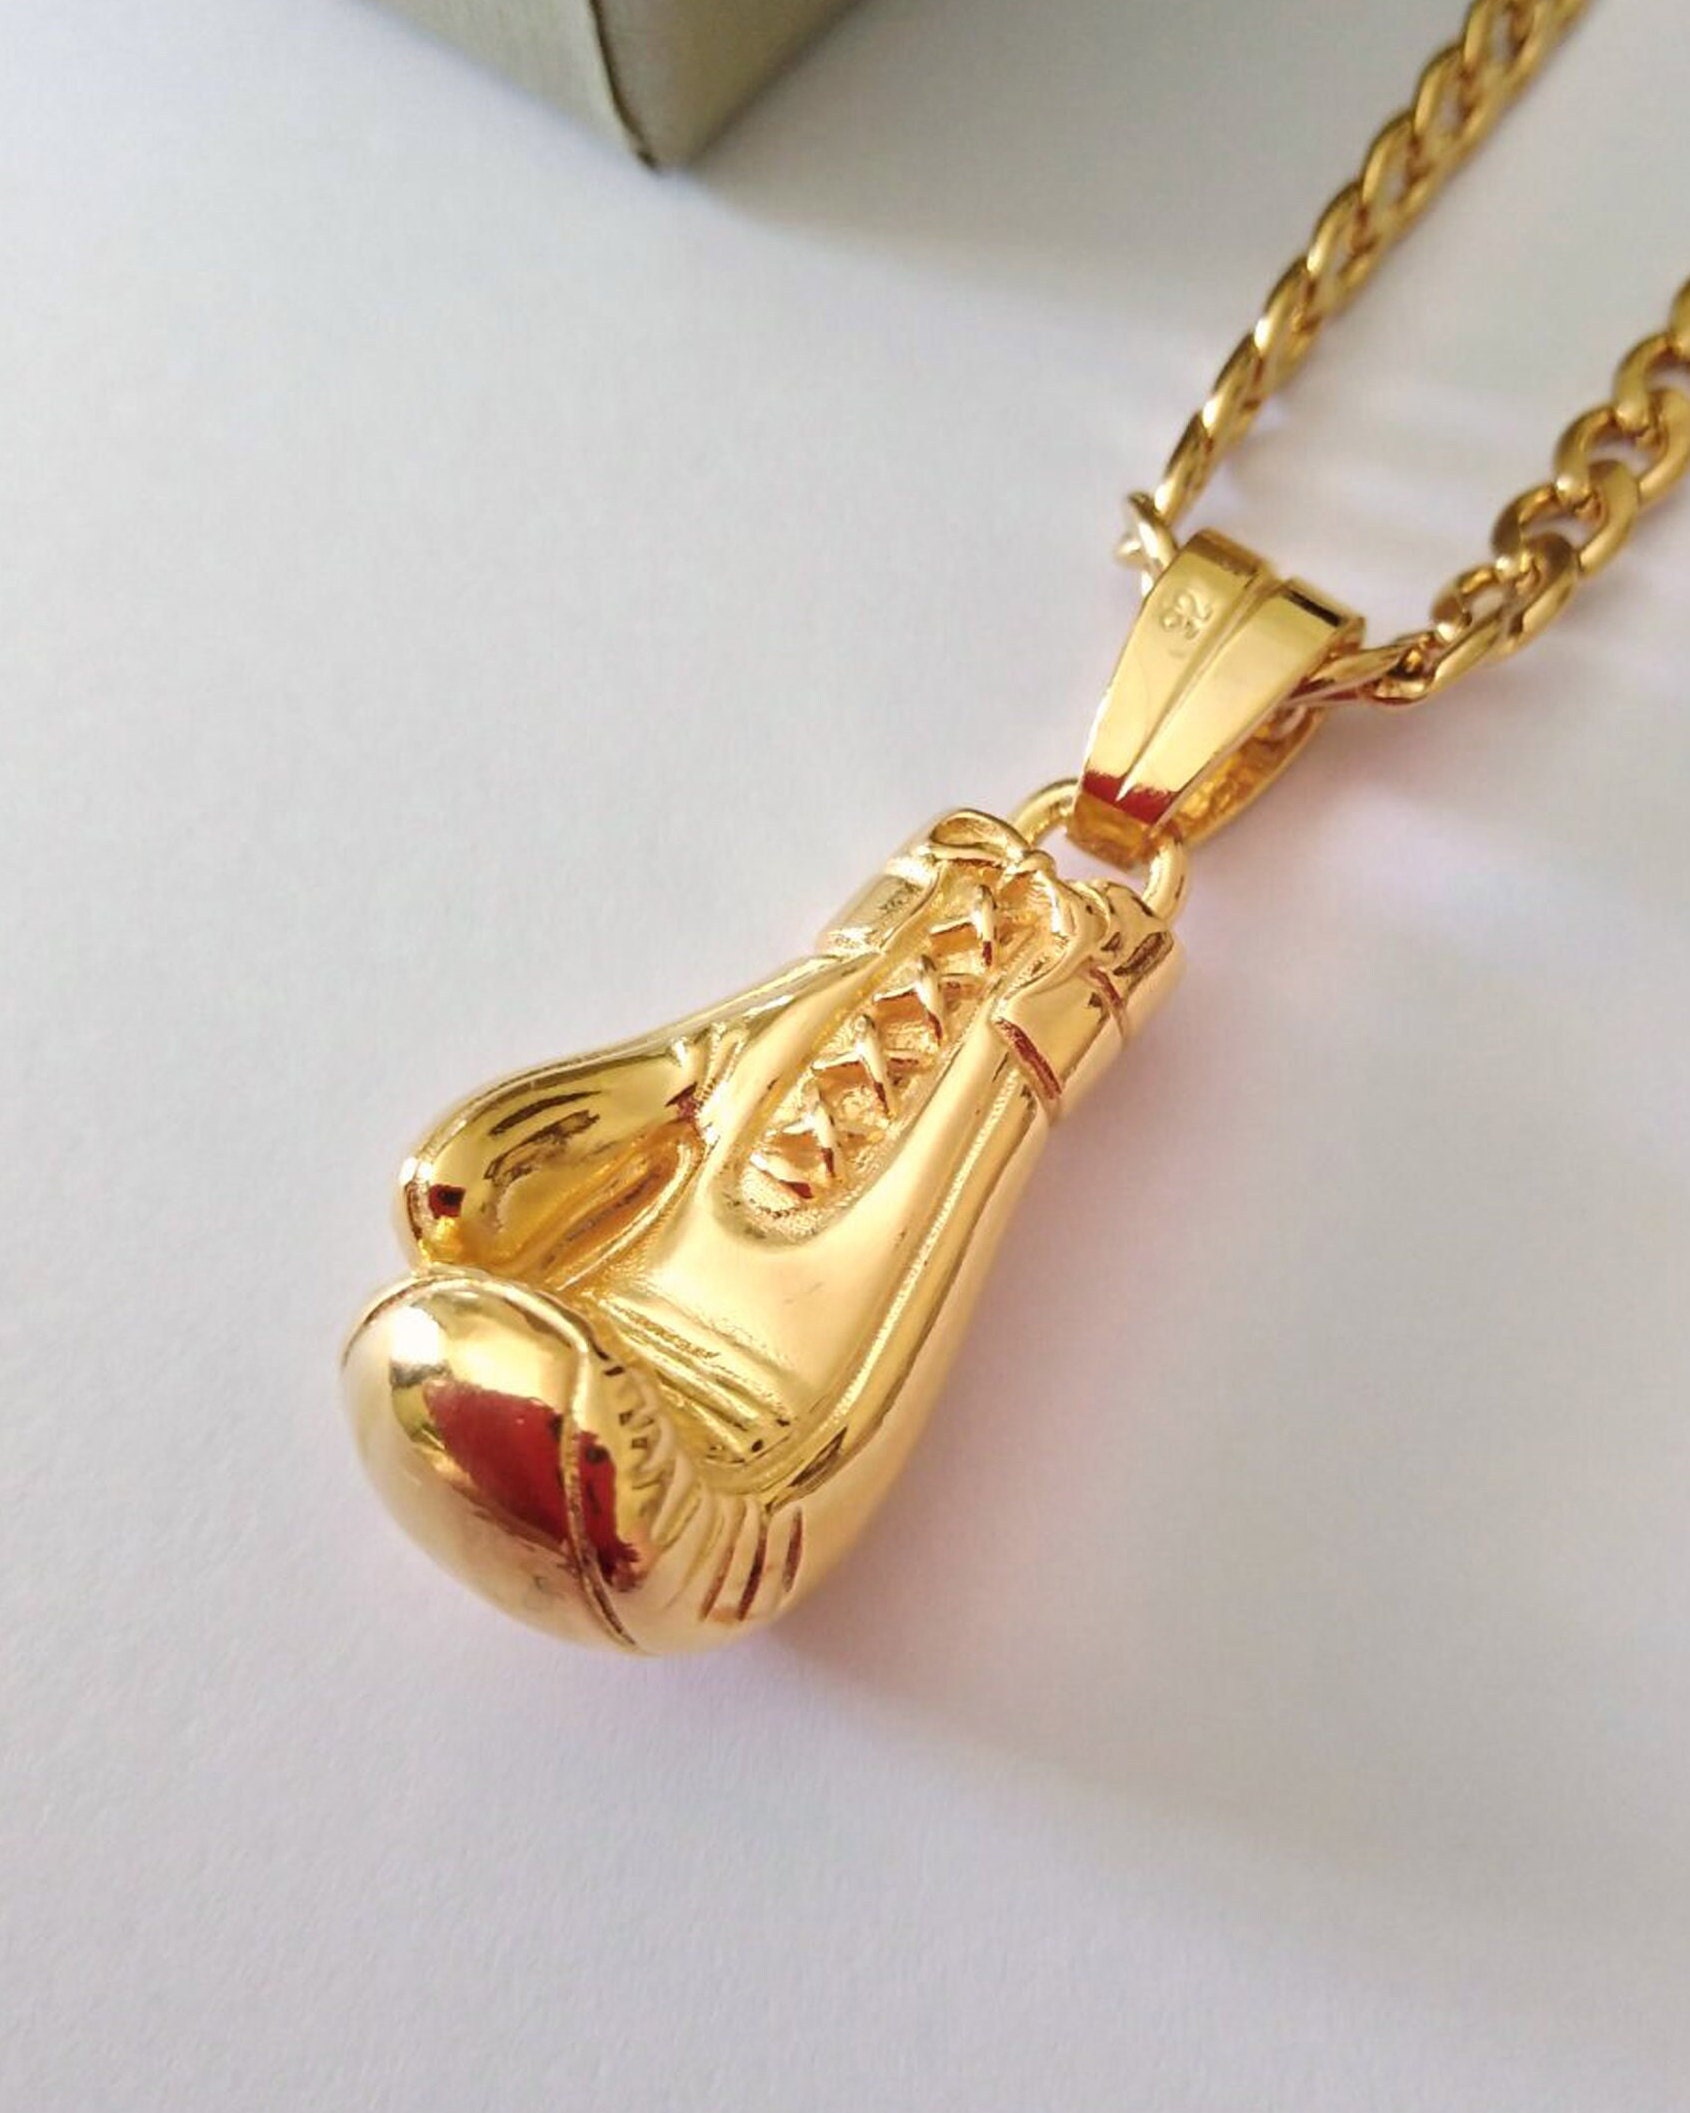 Pendant Necklace Gold/Silver Plated Mini Boxing Glove Necklace Boxing  Jewelry Cool Pendant For Men Boys Chain Necklaces From Huierjew, $1.35 |  DHgate.Com